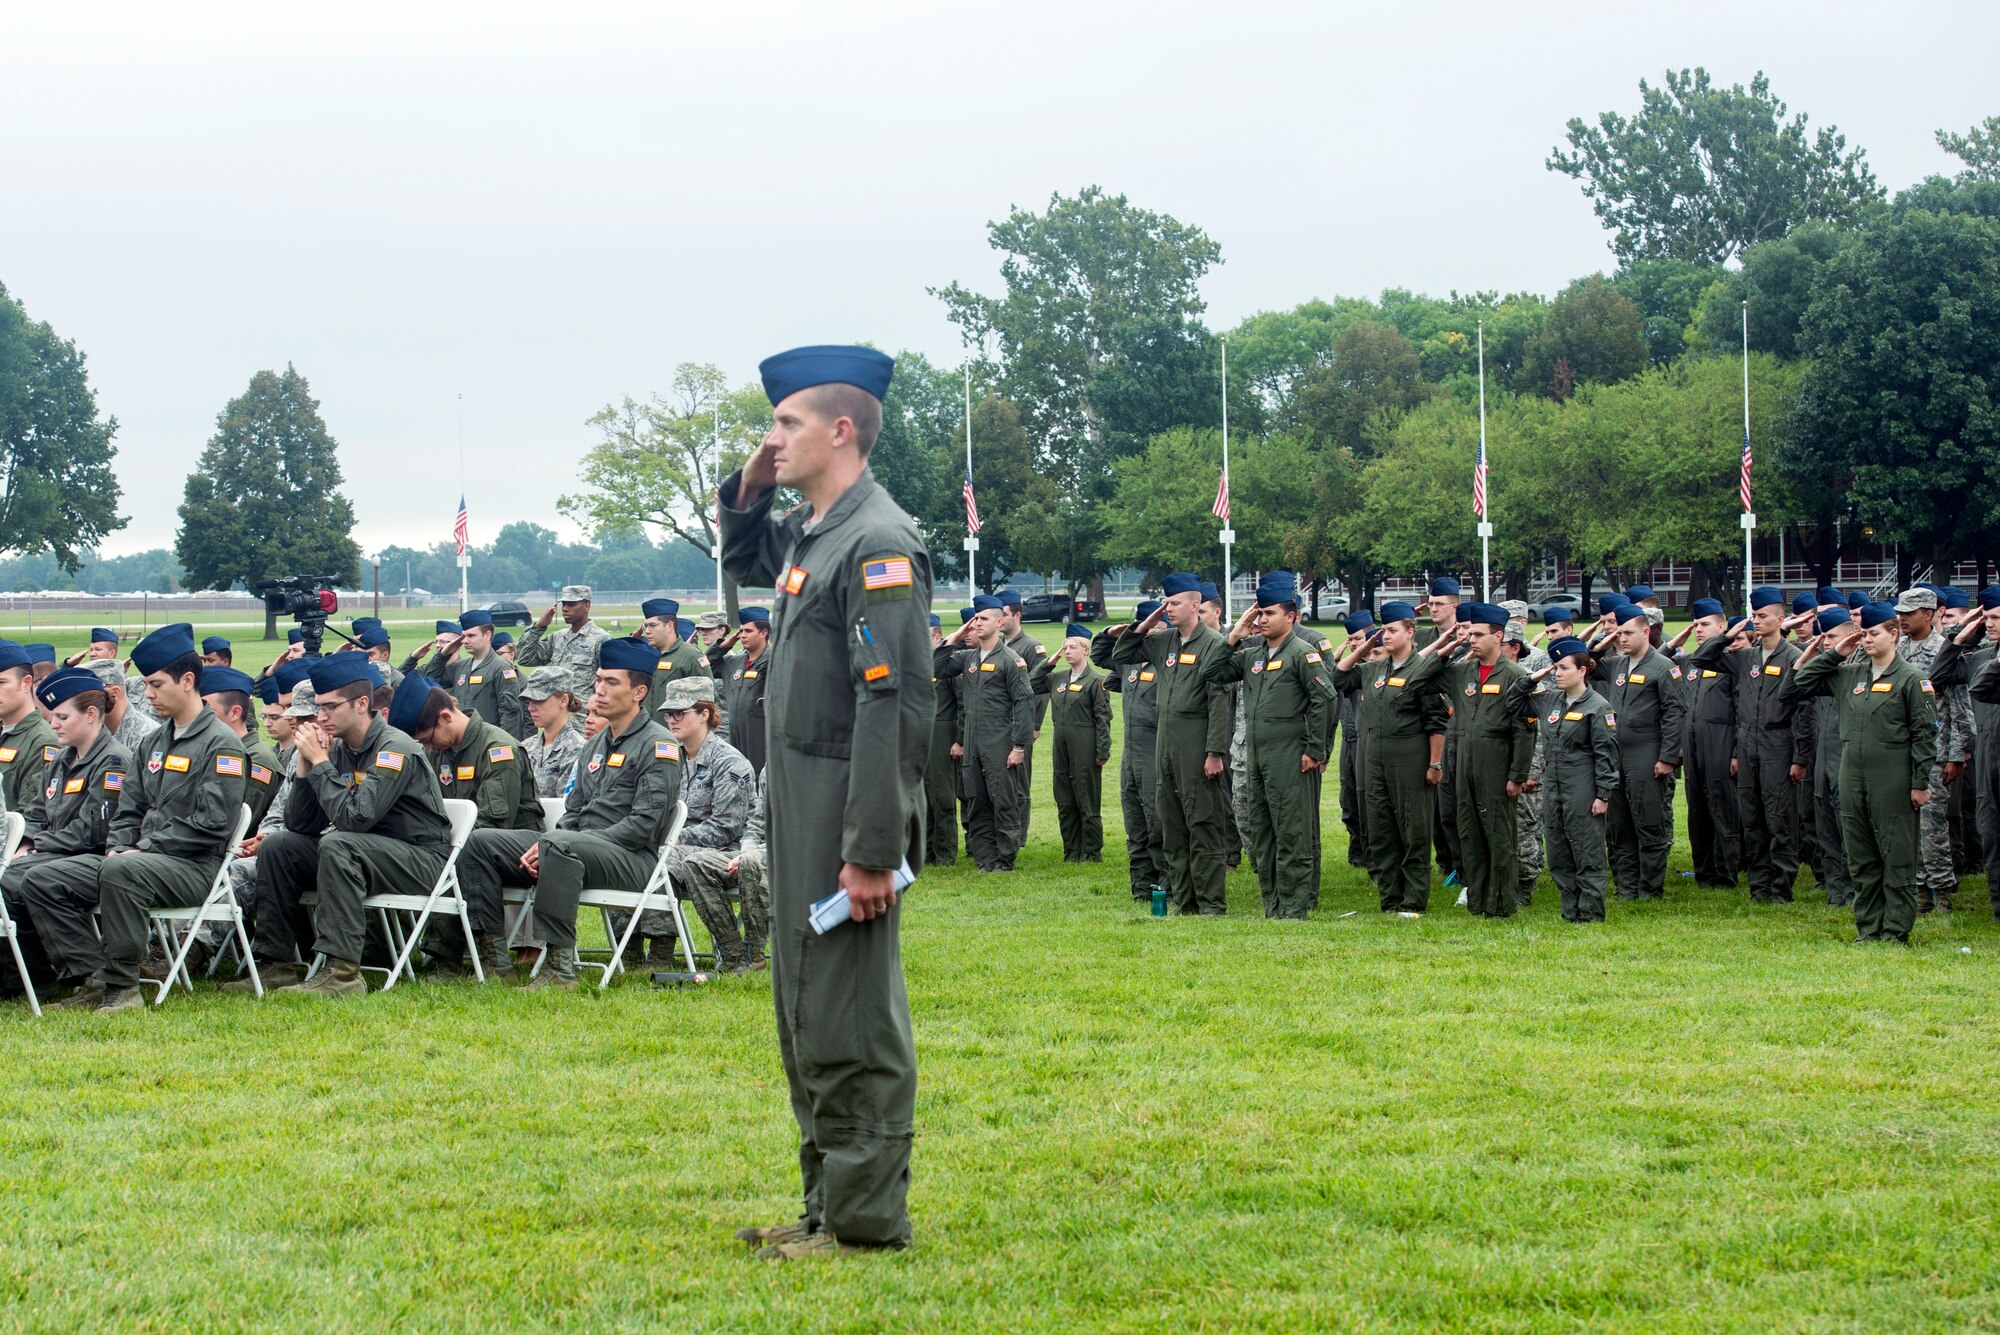 U.S. Air Force Master Sgt. Ken, 97th Intelligence Squadron superintendent of operations support, stands and salutes along with a formation of 97th IS Airman as “Taps,” plays during the 60528 Remembrance Ceremony Aug. 30, 2018, at Offutt Air Force Base, Nebraska. The ceremony was held in remembrance of 17 crewmembers who lost their lives when 60528, a C-130 modified to fly reconnaissance missions, was shot down during the Cold War.  (U.S. Air Force photo by L. Cunningham)